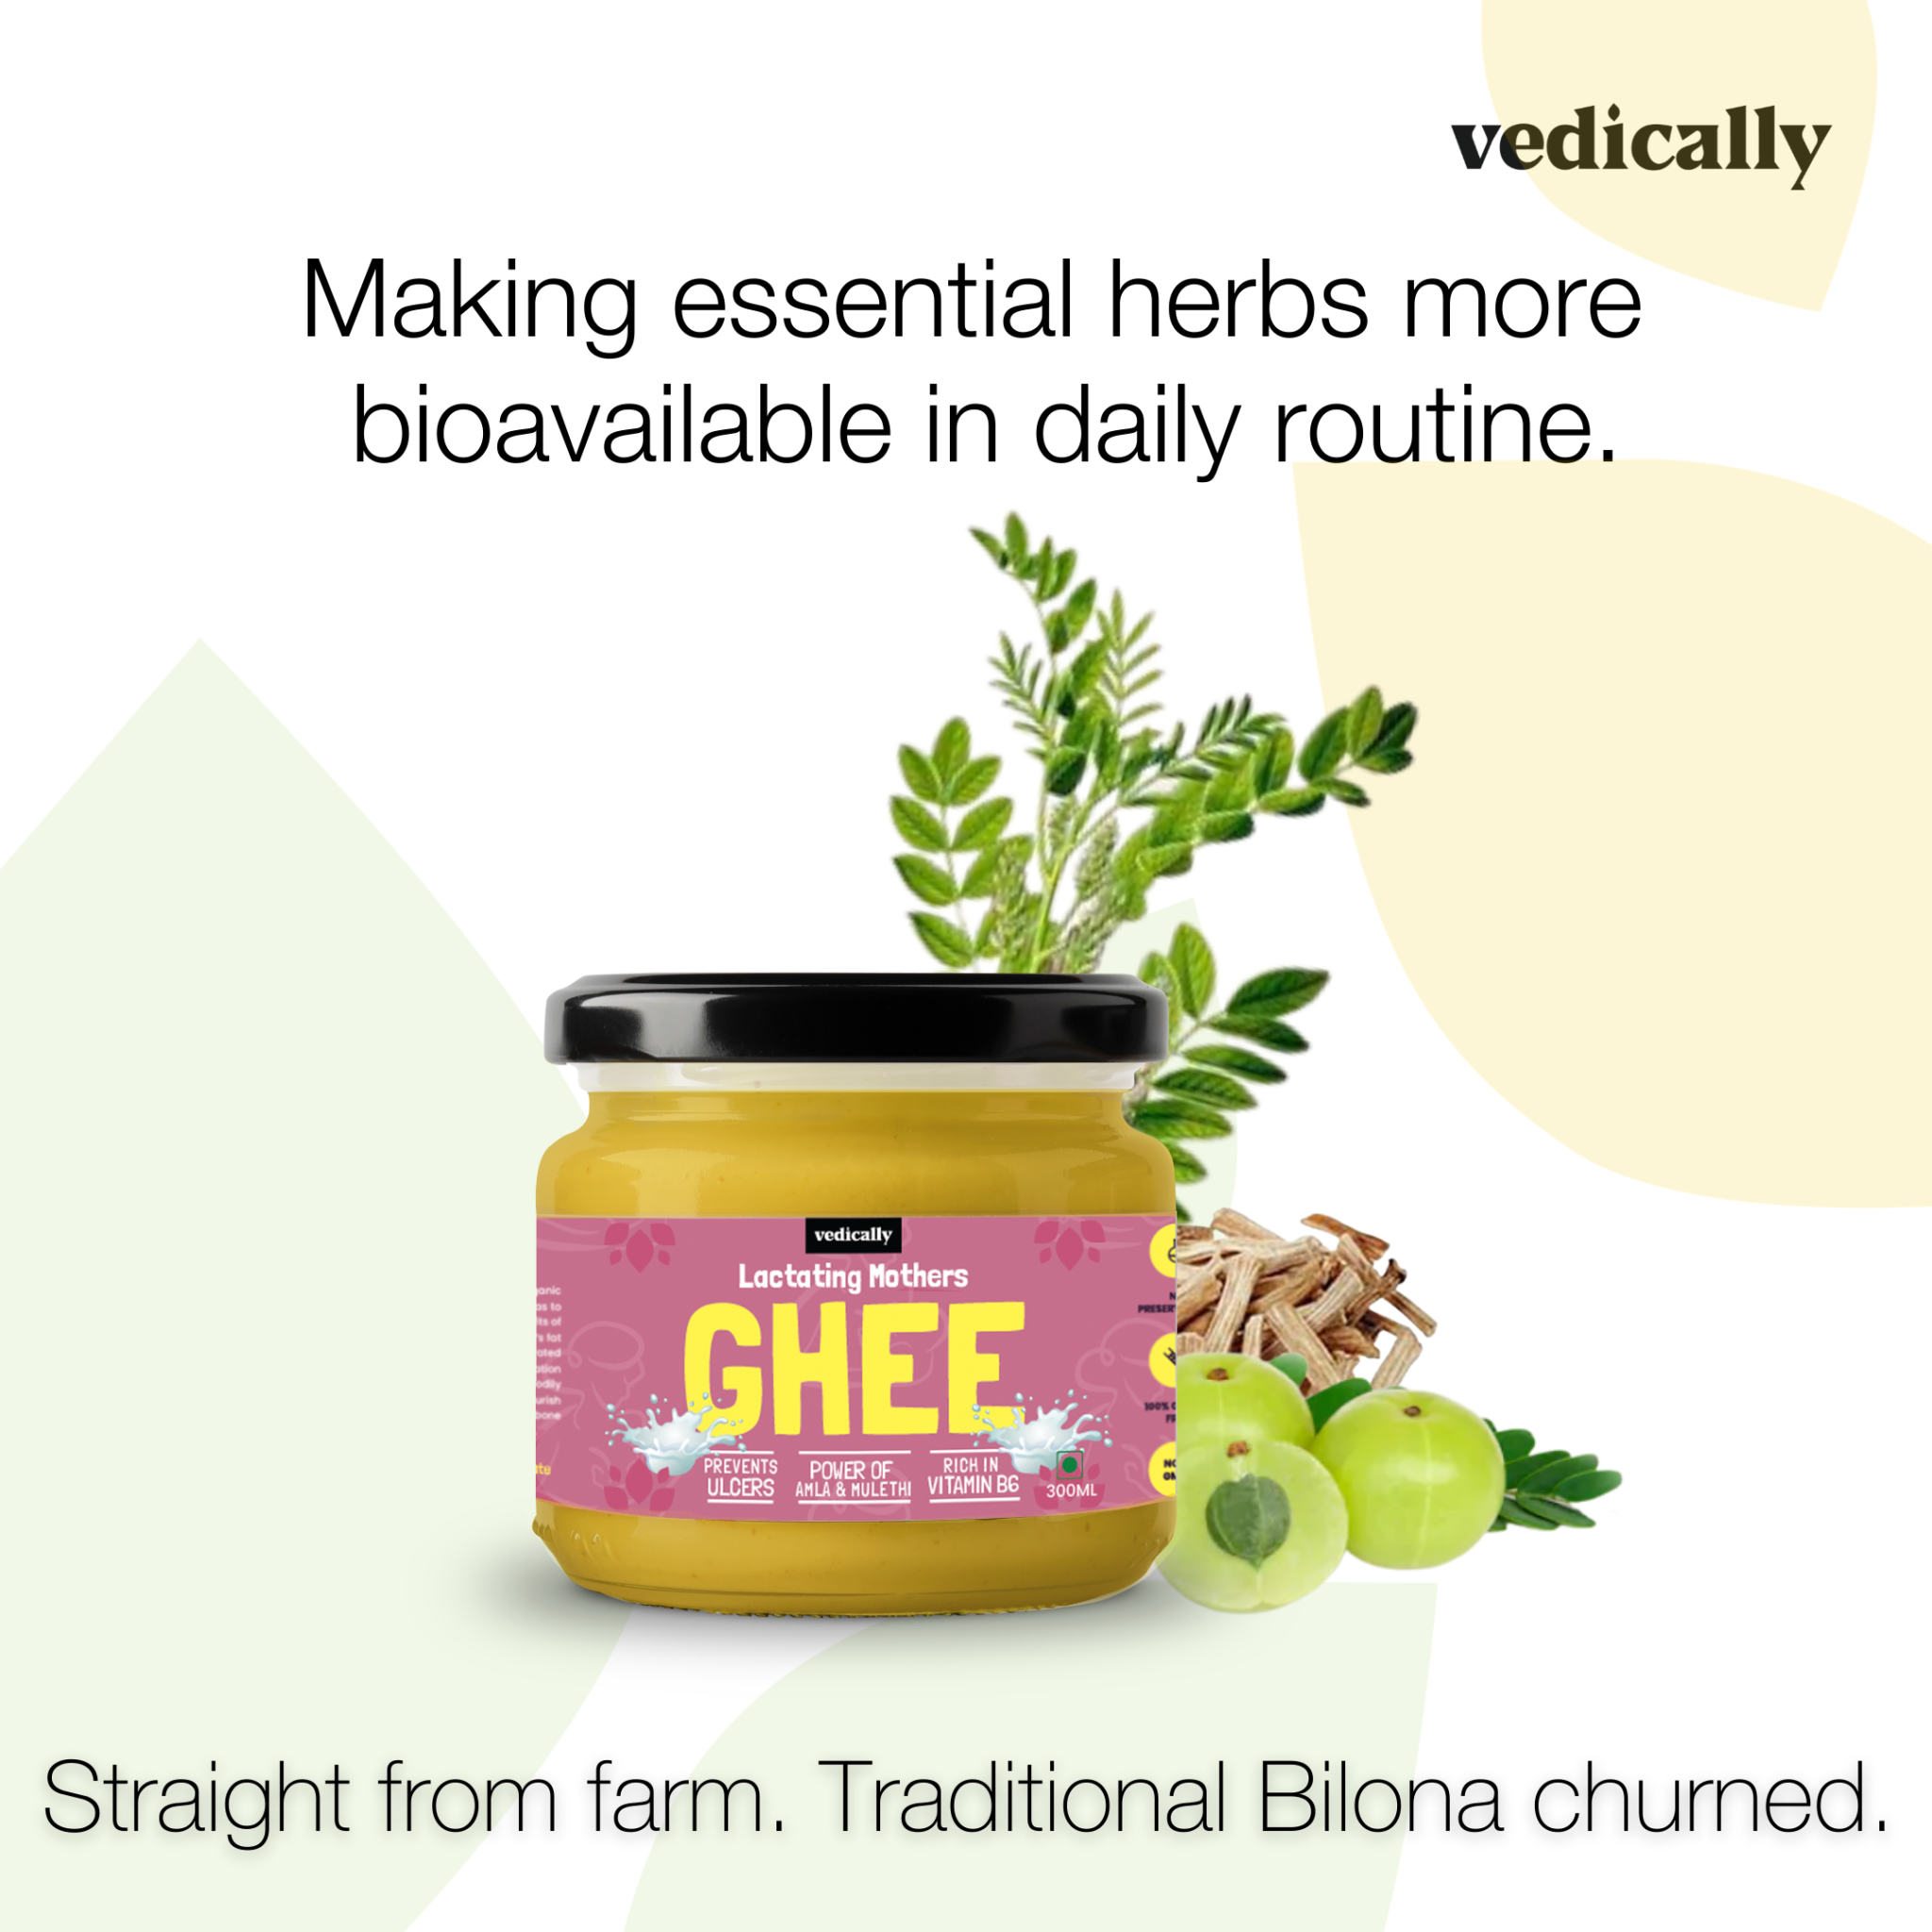 Product: Vedically Lactating Mother’s Ghee